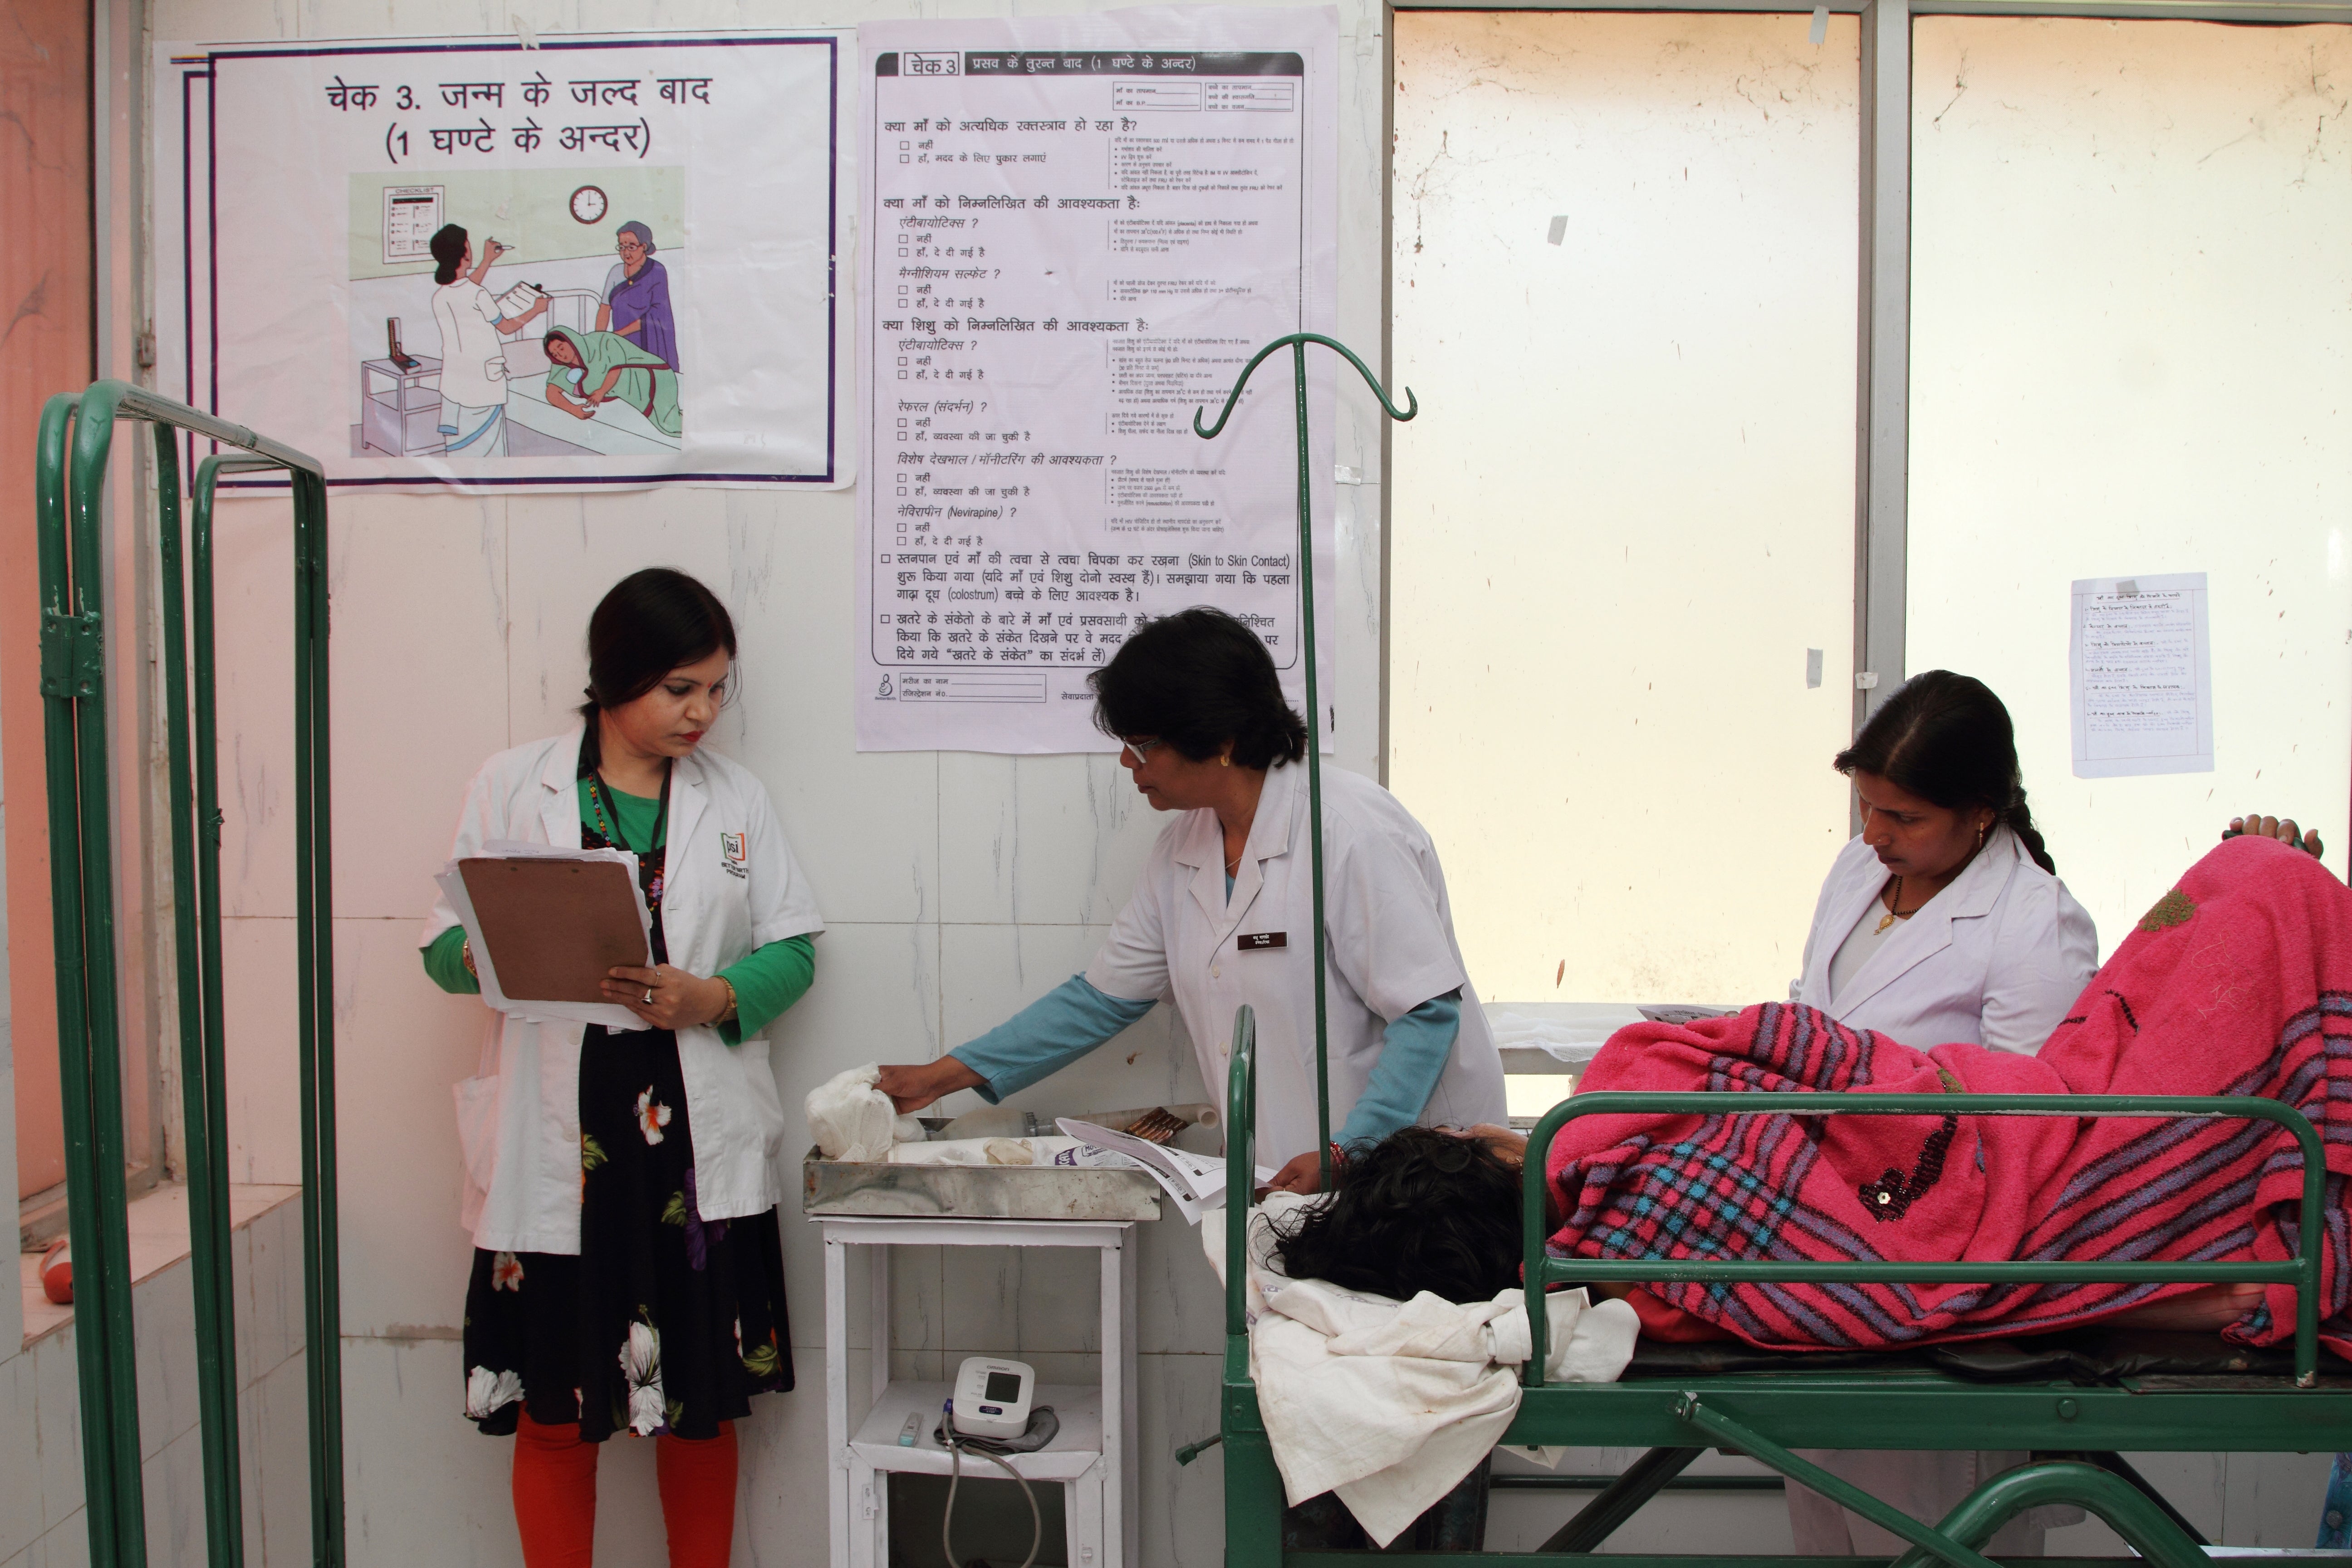 Birth attendants and a BetterBirth coach use the Safe Childbirth Checklist, hanging on the wall, at a facility in Uttar Pradesh to ensure quality care the new mother and baby.